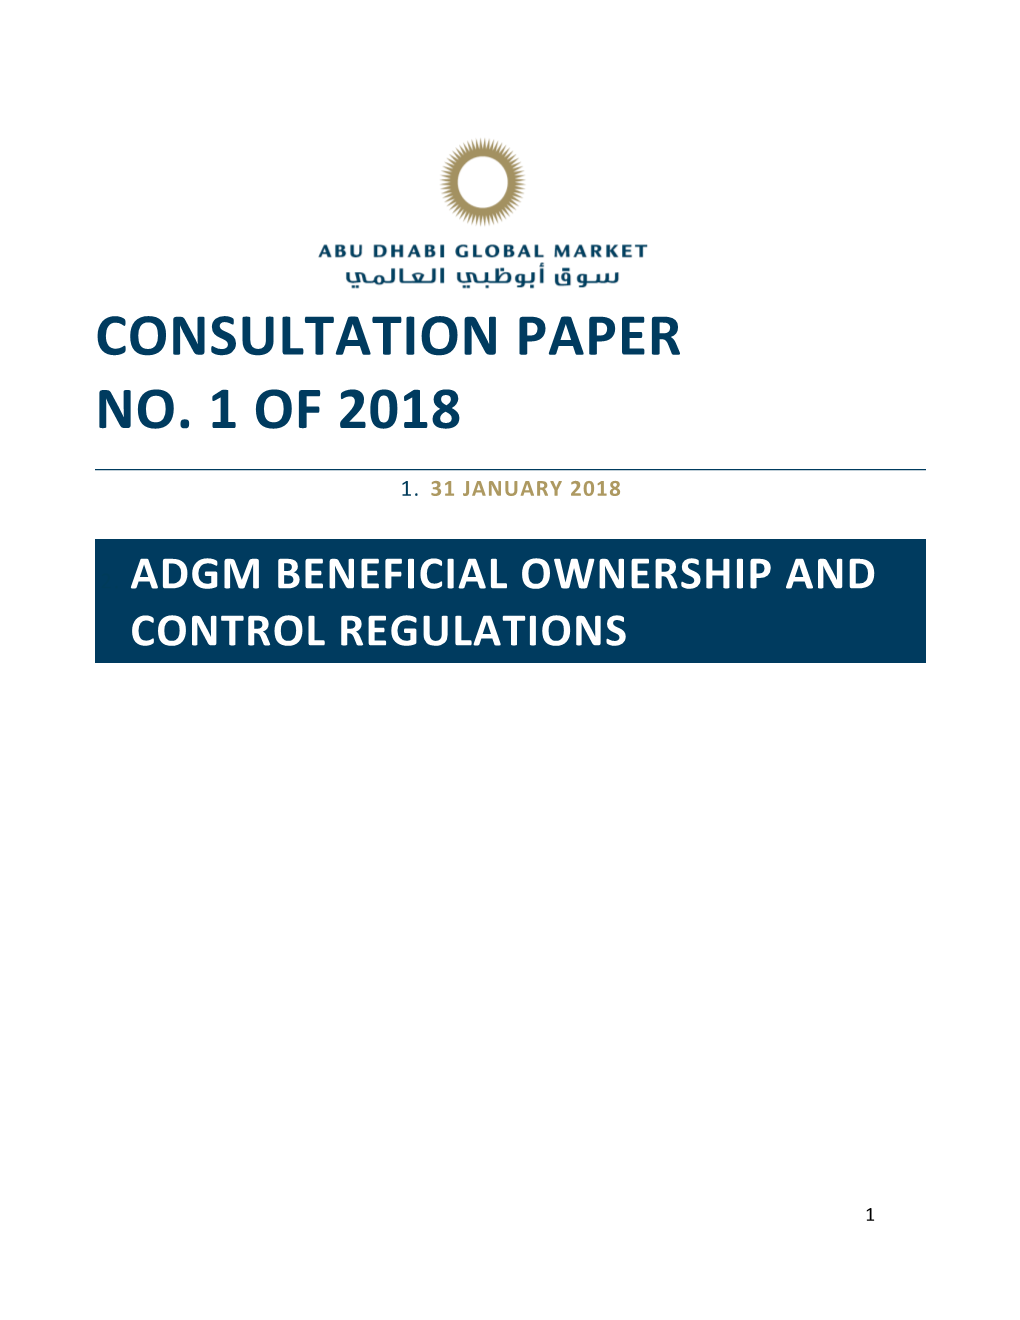 Adgm Beneficial Ownership and Control Regulations